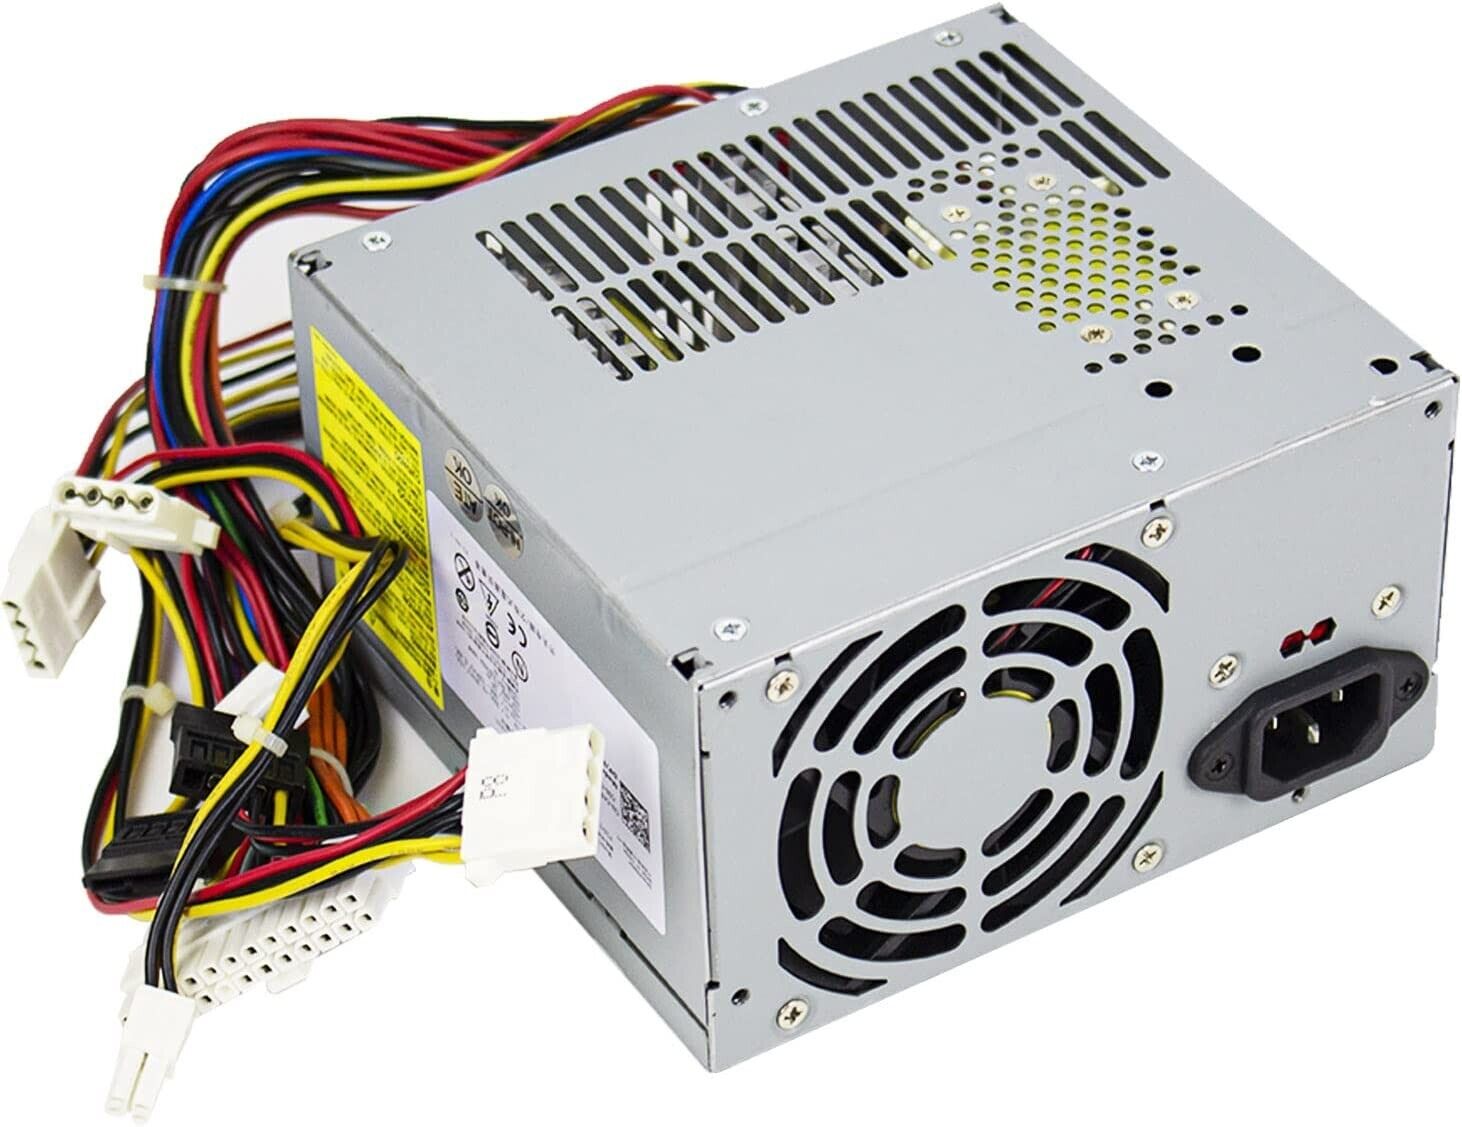 300W P3017F3P LF J036N XW600 Watt Replacement Power Supply for Dell Vostro, Stud